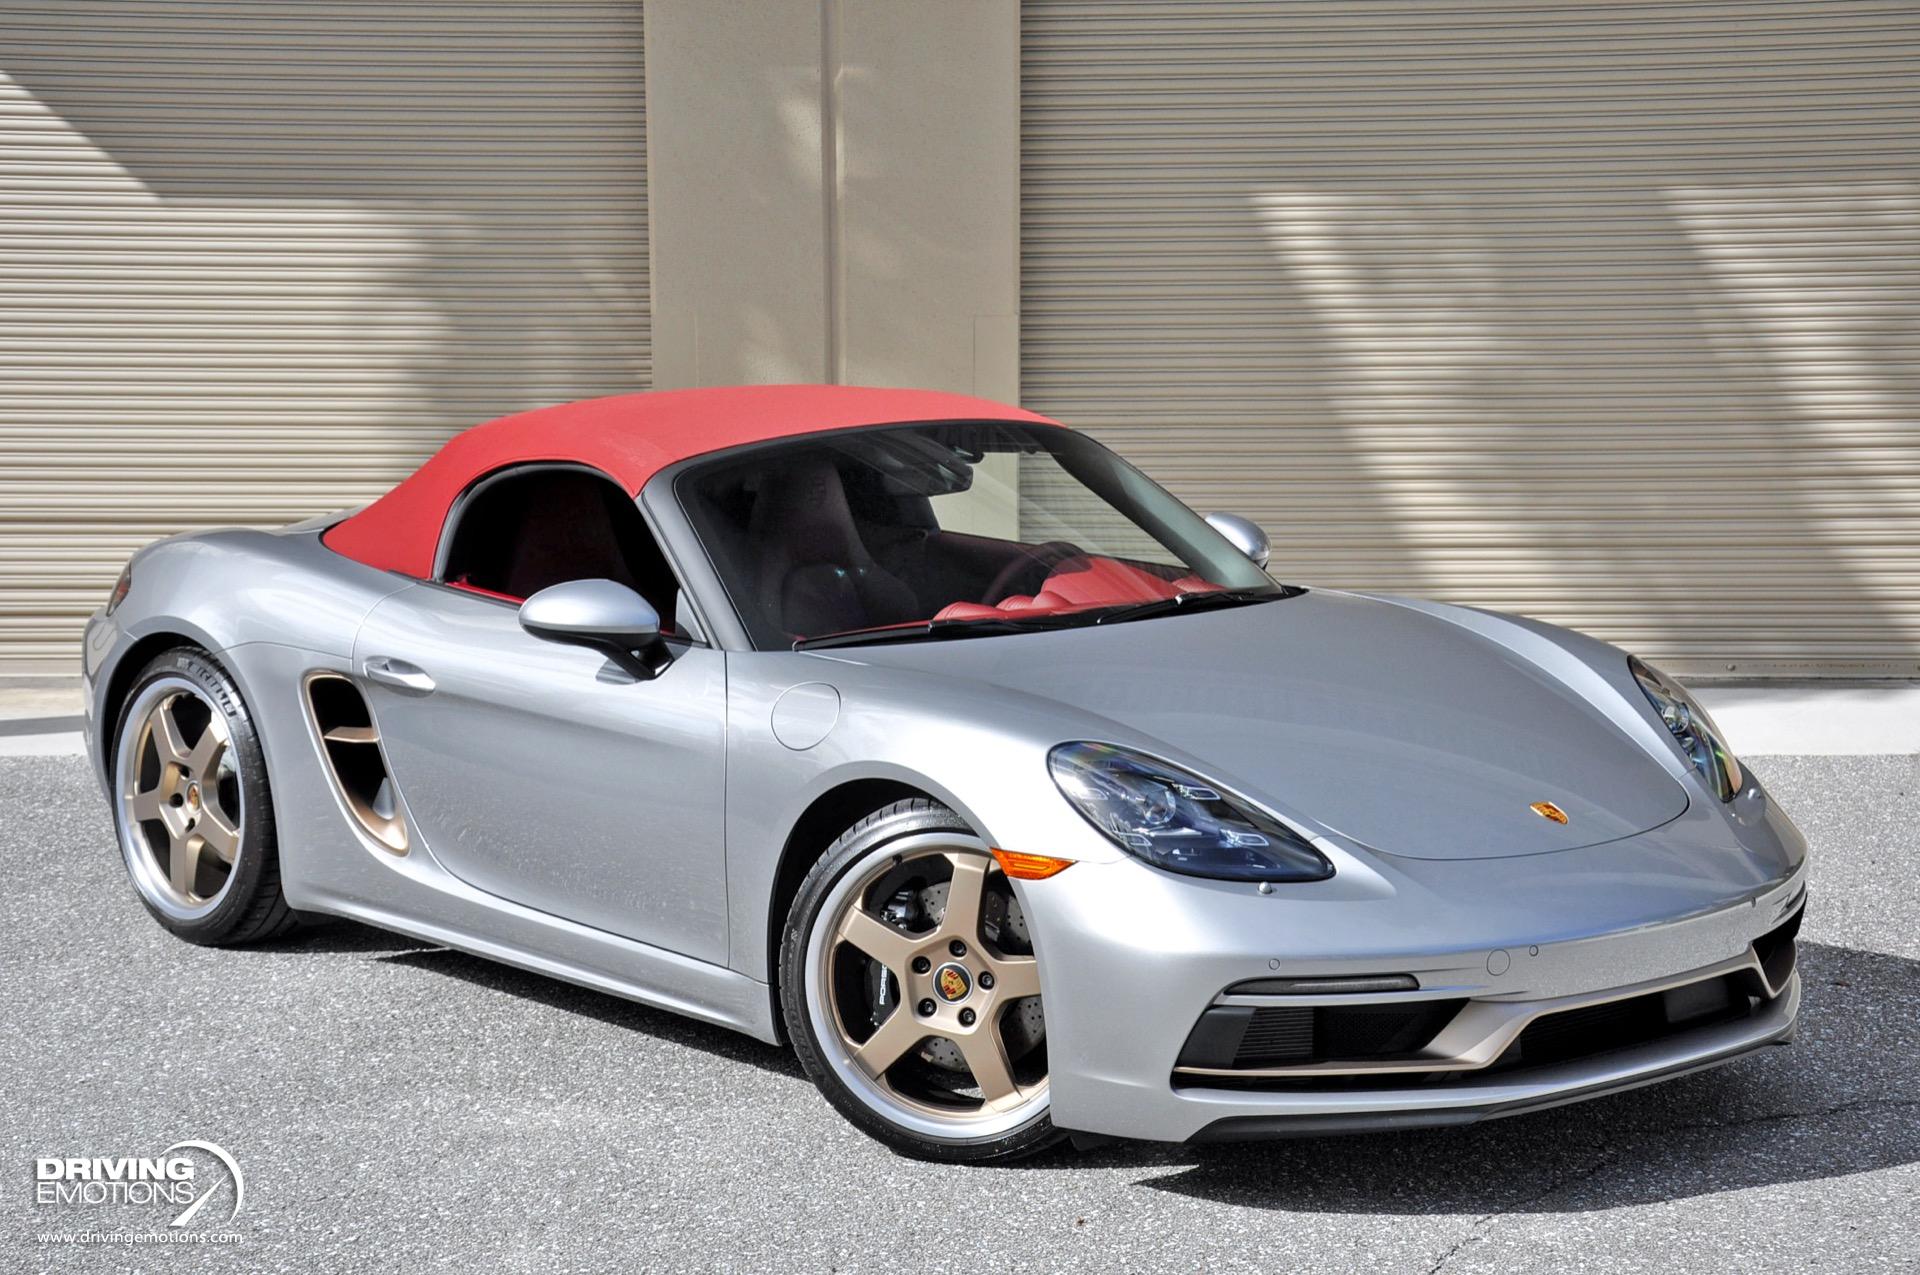 Used 2022 Porsche Boxster 25 Years! Number 416 of 1250 Built! 6-Speed Manual! RARE!! | Lake Park, FL